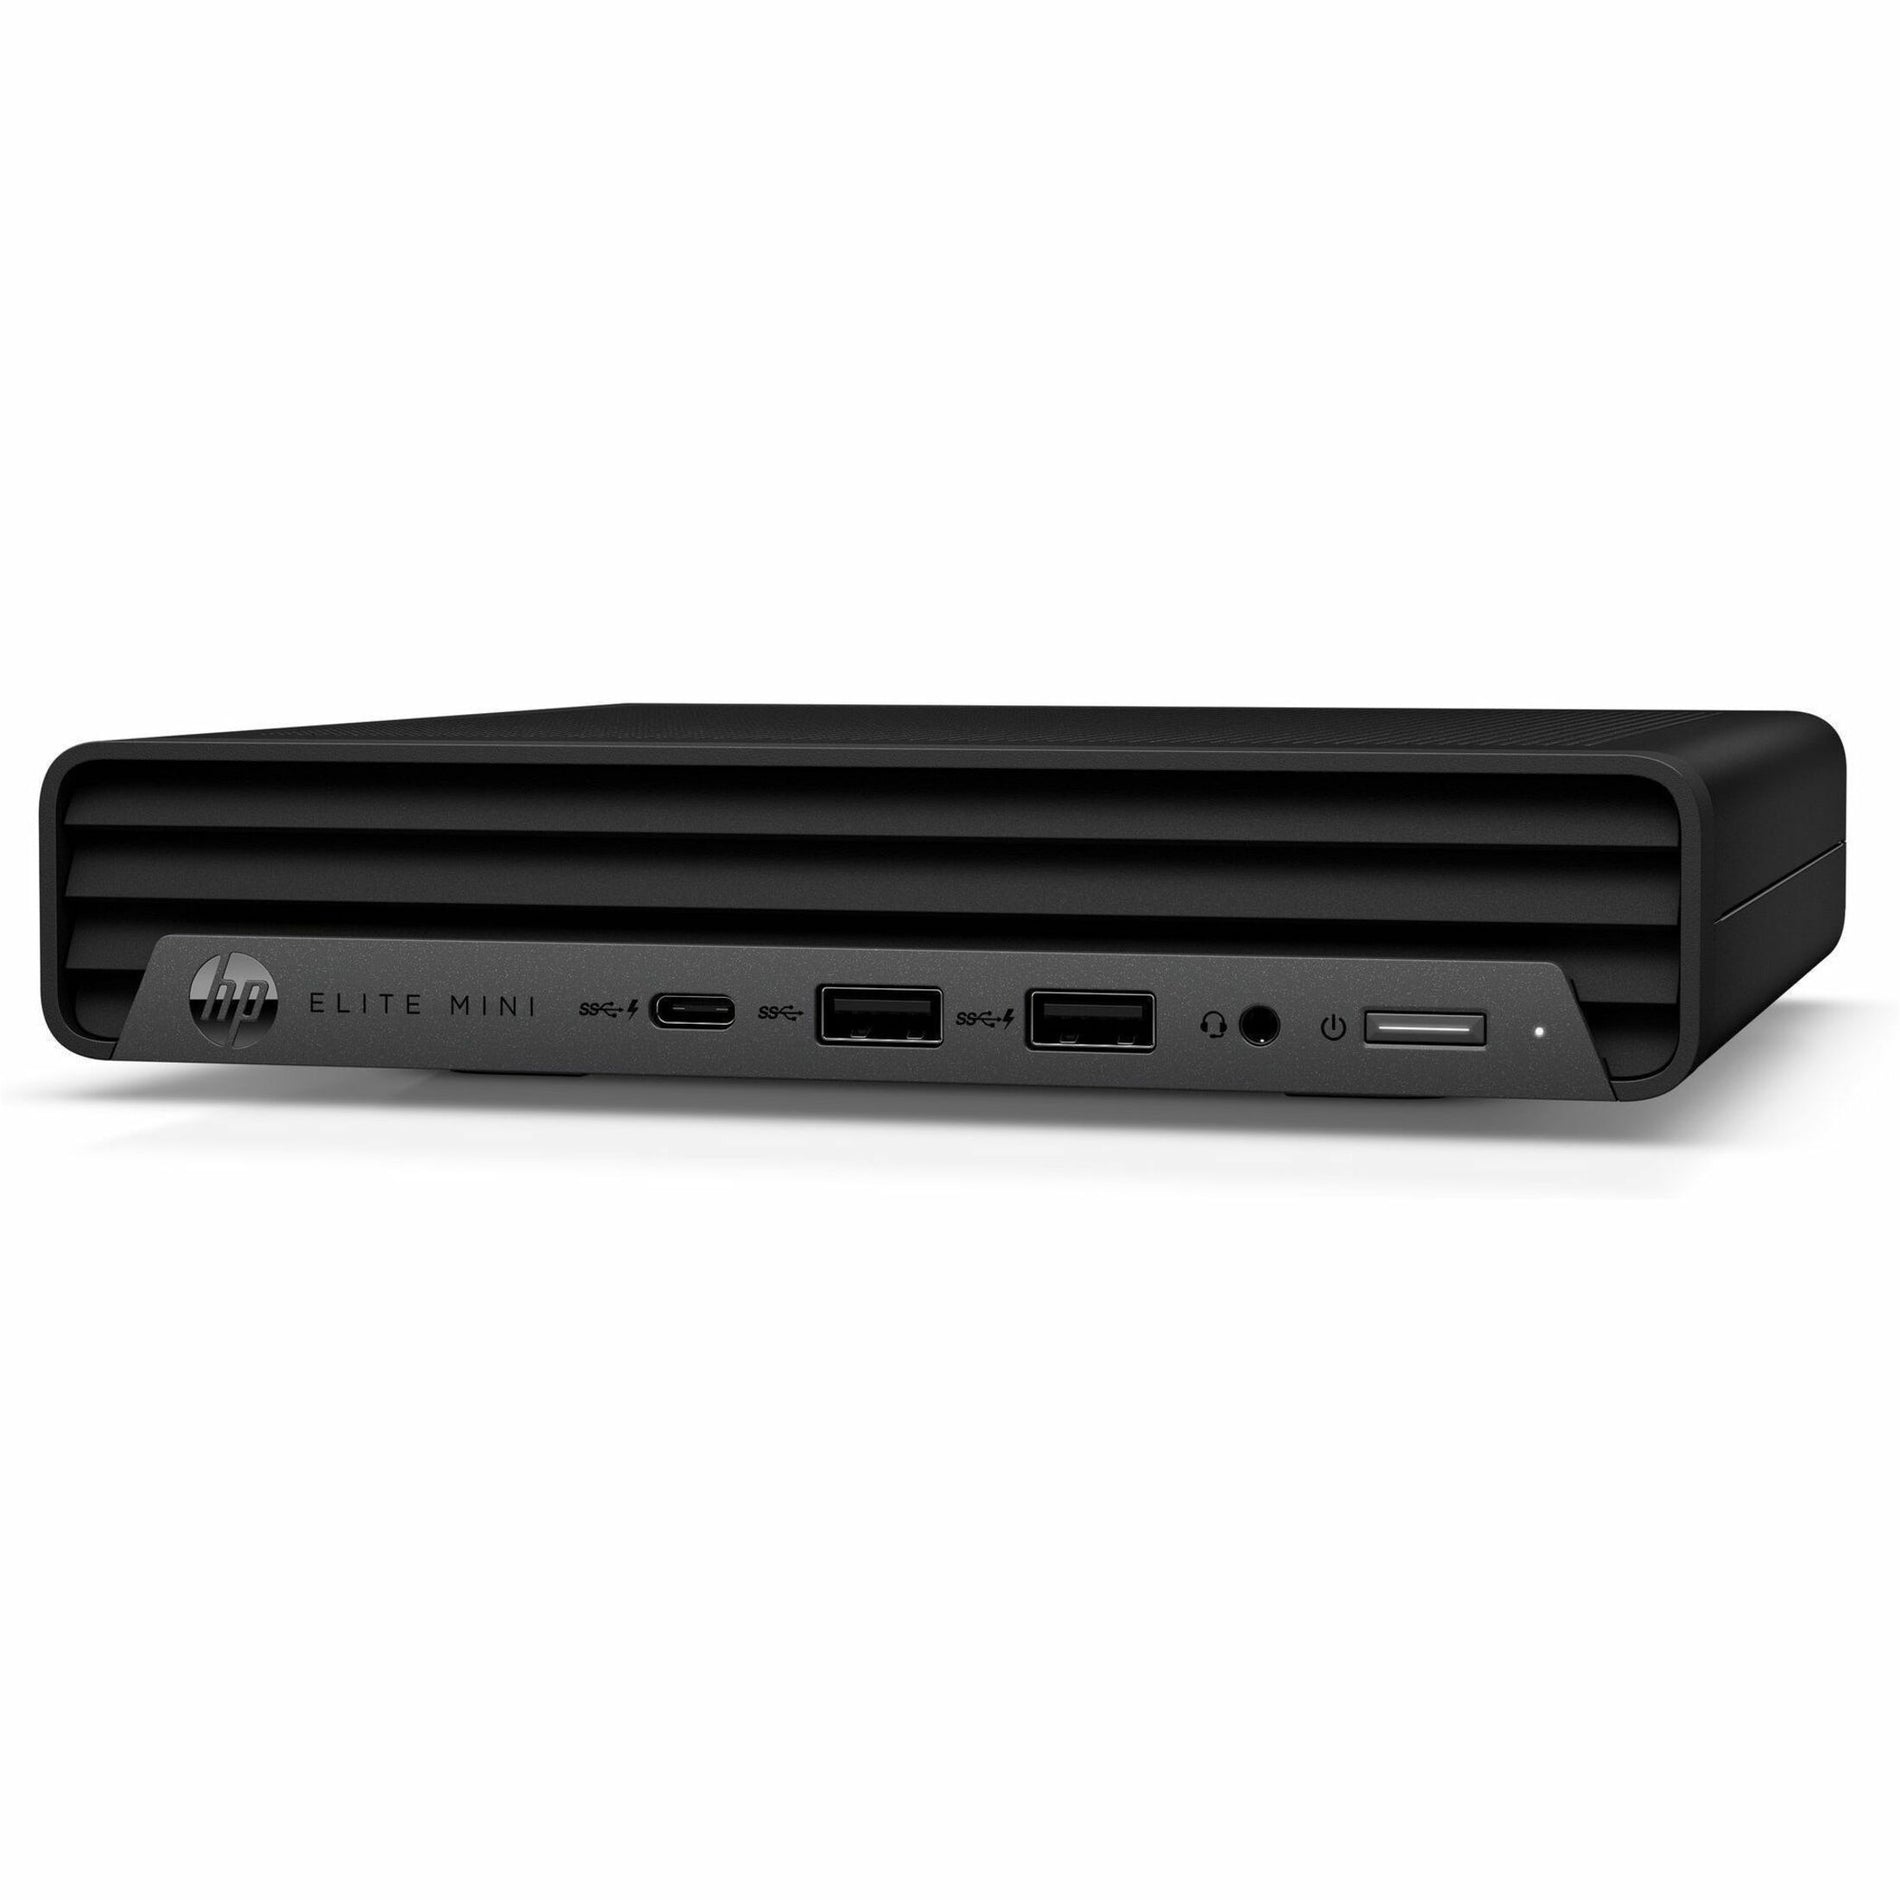 HP Mini Conference G9 PC with Microsoft Team Rooms, Intel Core i7 12th Gen i7-12700T Dodeca-core (12 Core) 1.40 GHz, 16 GB RAM DDR5 SDRAM, 256 GB M.2 SSD